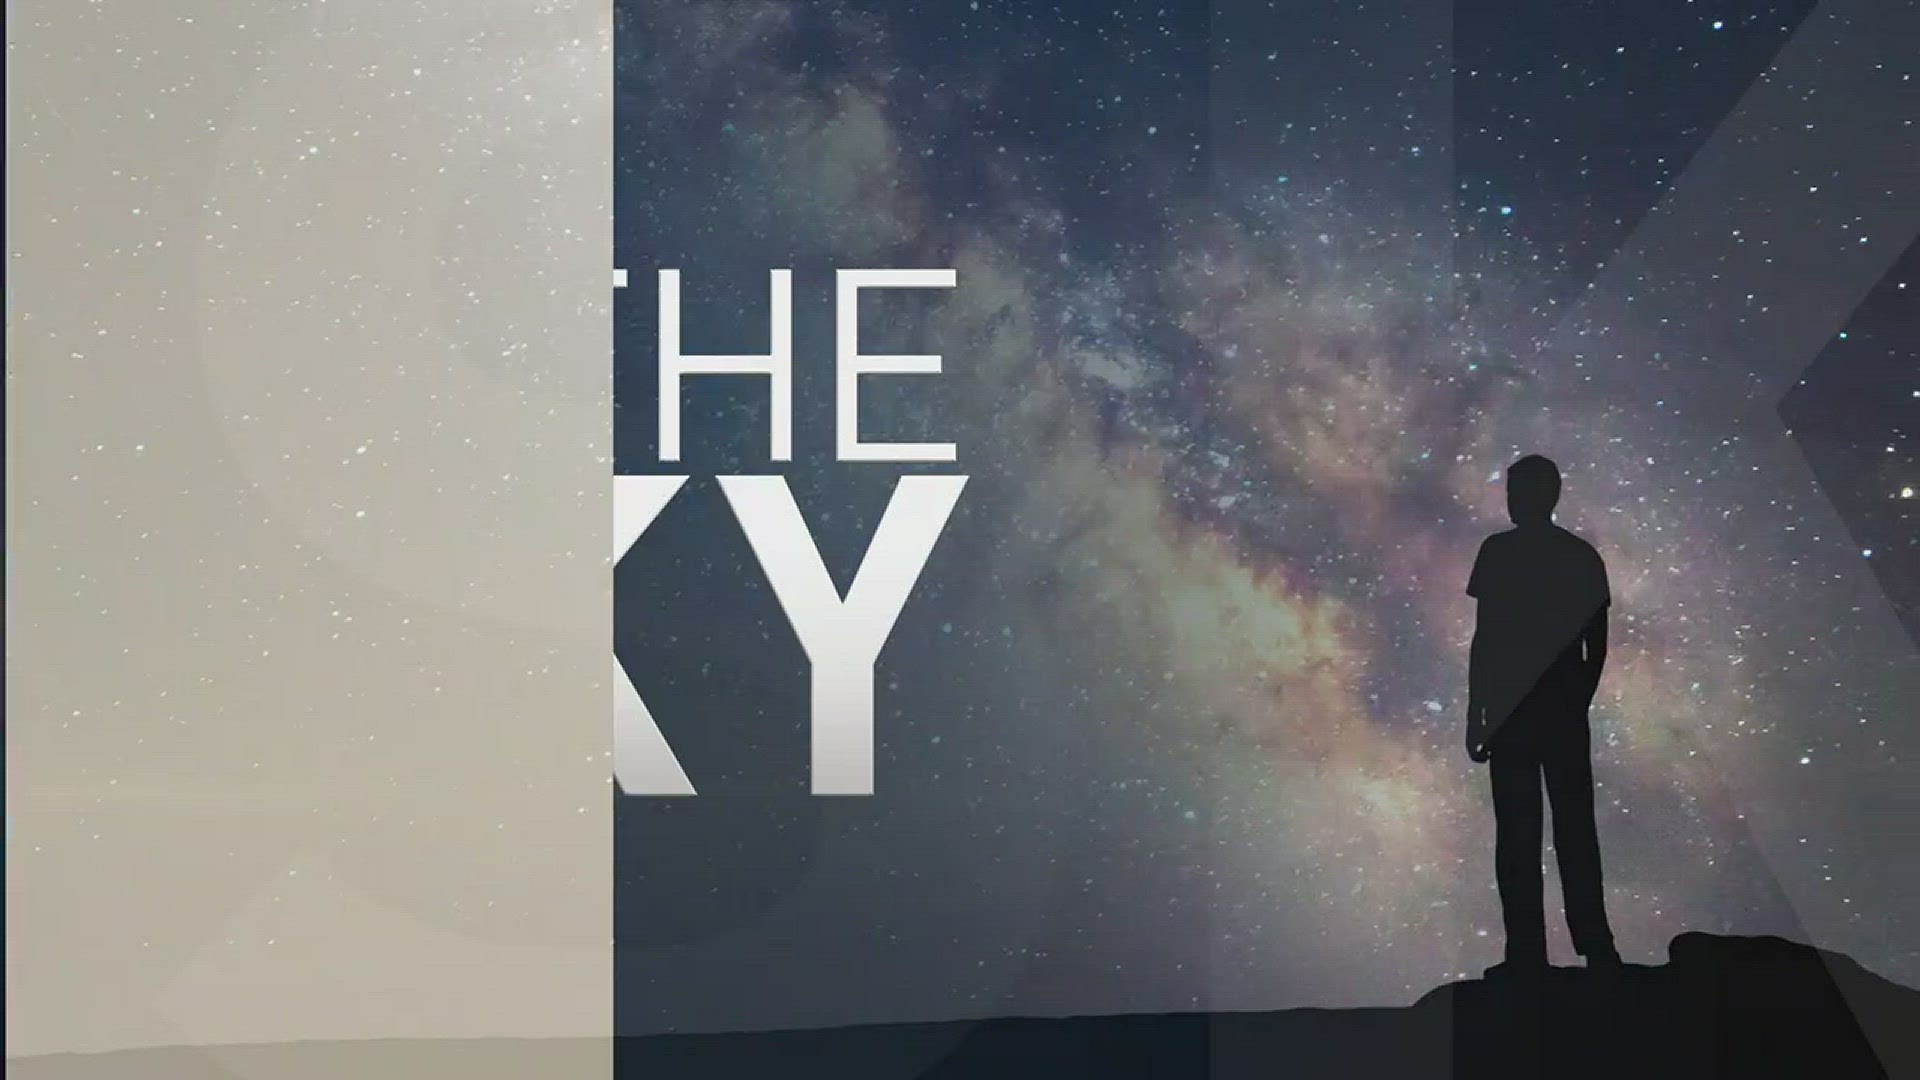 Jay Reynolds (@reynoldsastro) & Gale Franco have a look at some cool activities for stargazers the whole family can enjoy on "In The Sky."